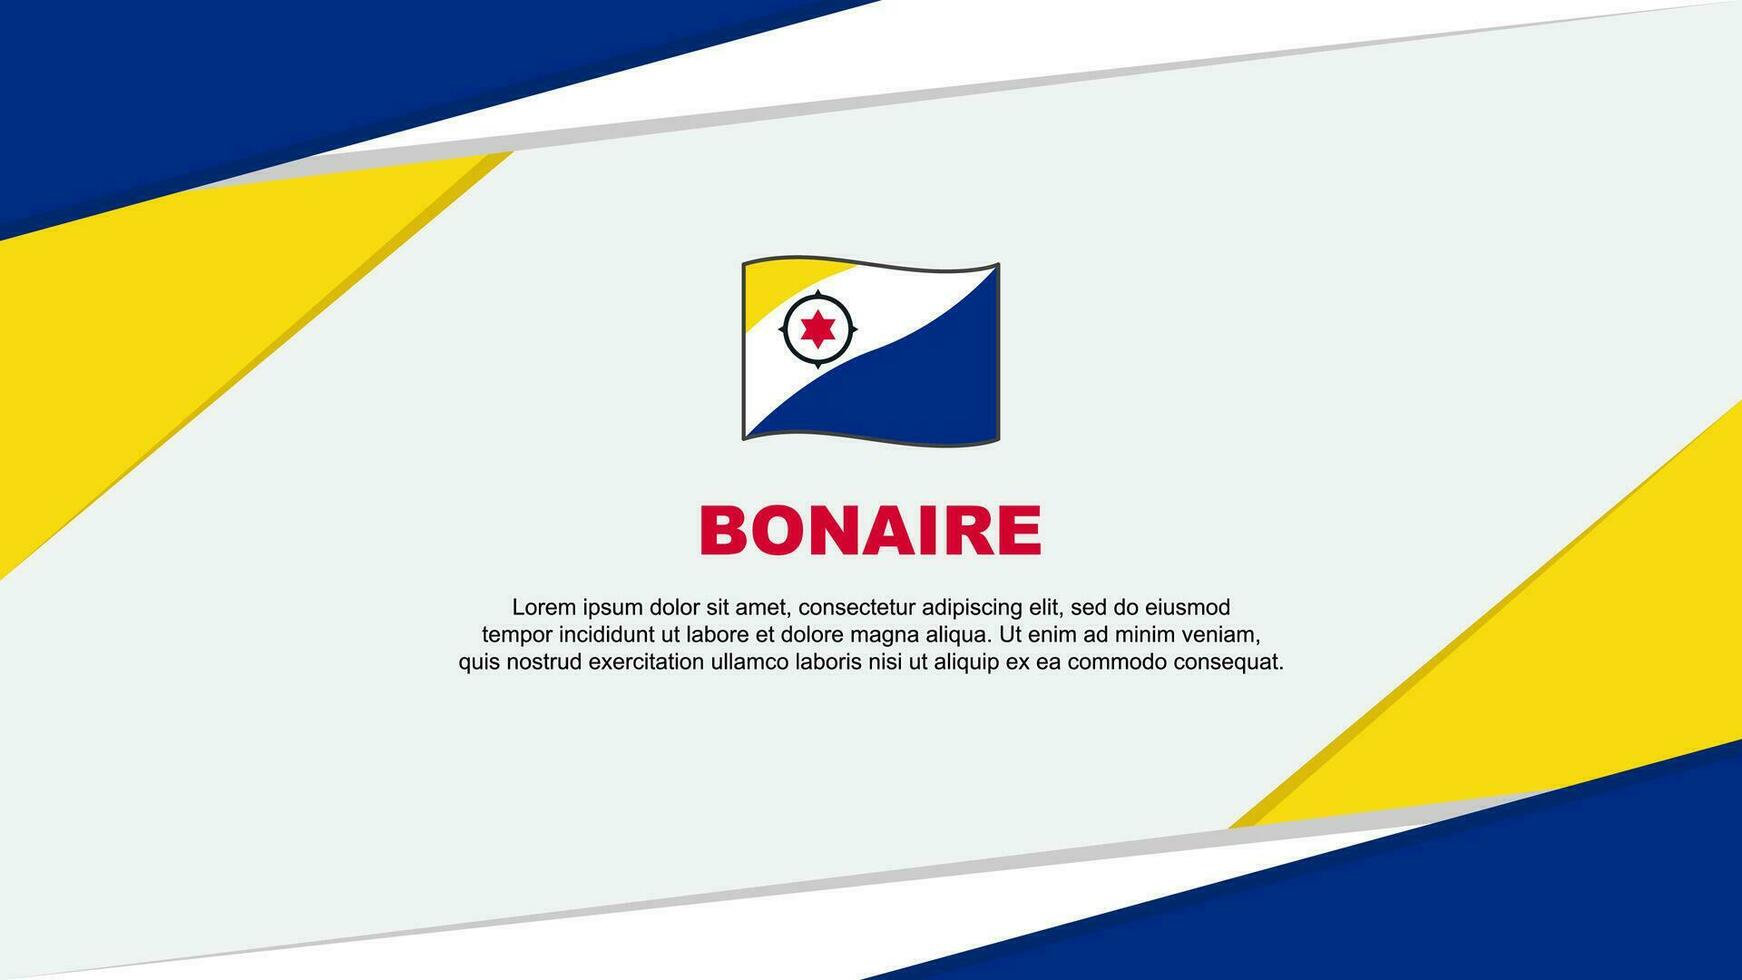 Bonaire Flag Abstract Background Design Template. Bonaire Independence Day Banner Cartoon Vector Illustration. Bonaire